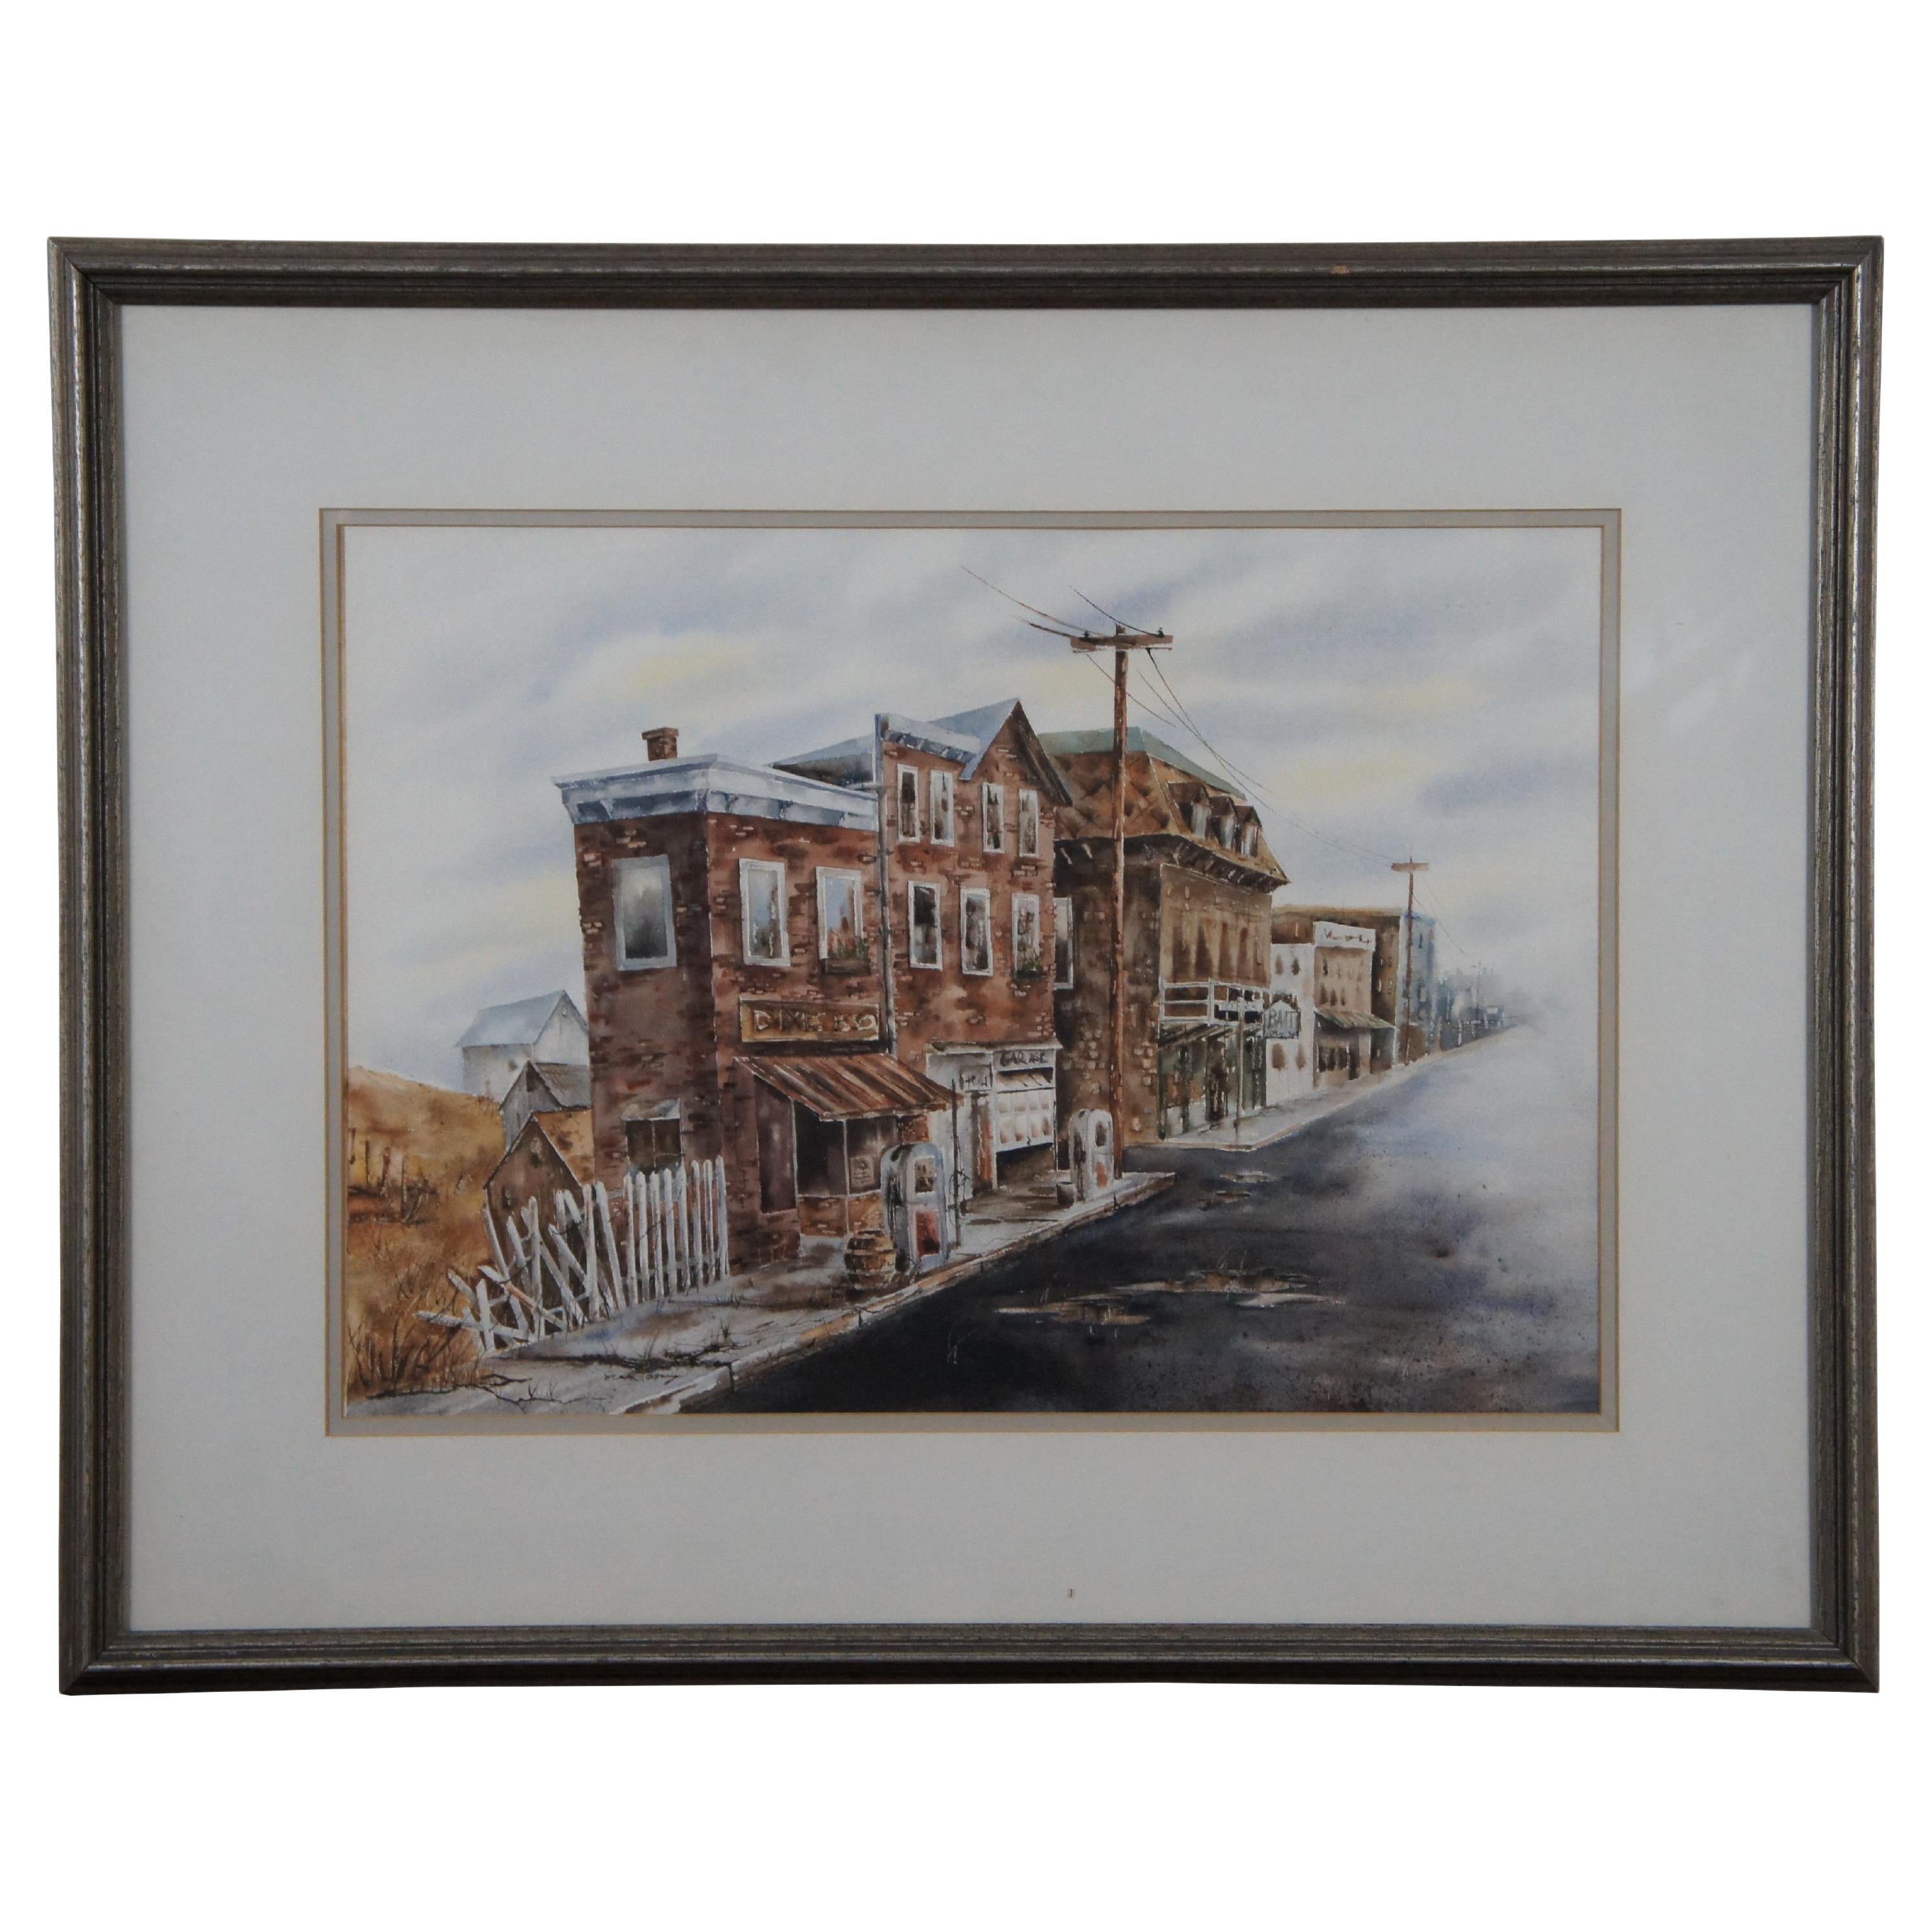 Vintage Dixie Highway US 150 Cityscape Watercolor Painting Rustic Town Framed  For Sale